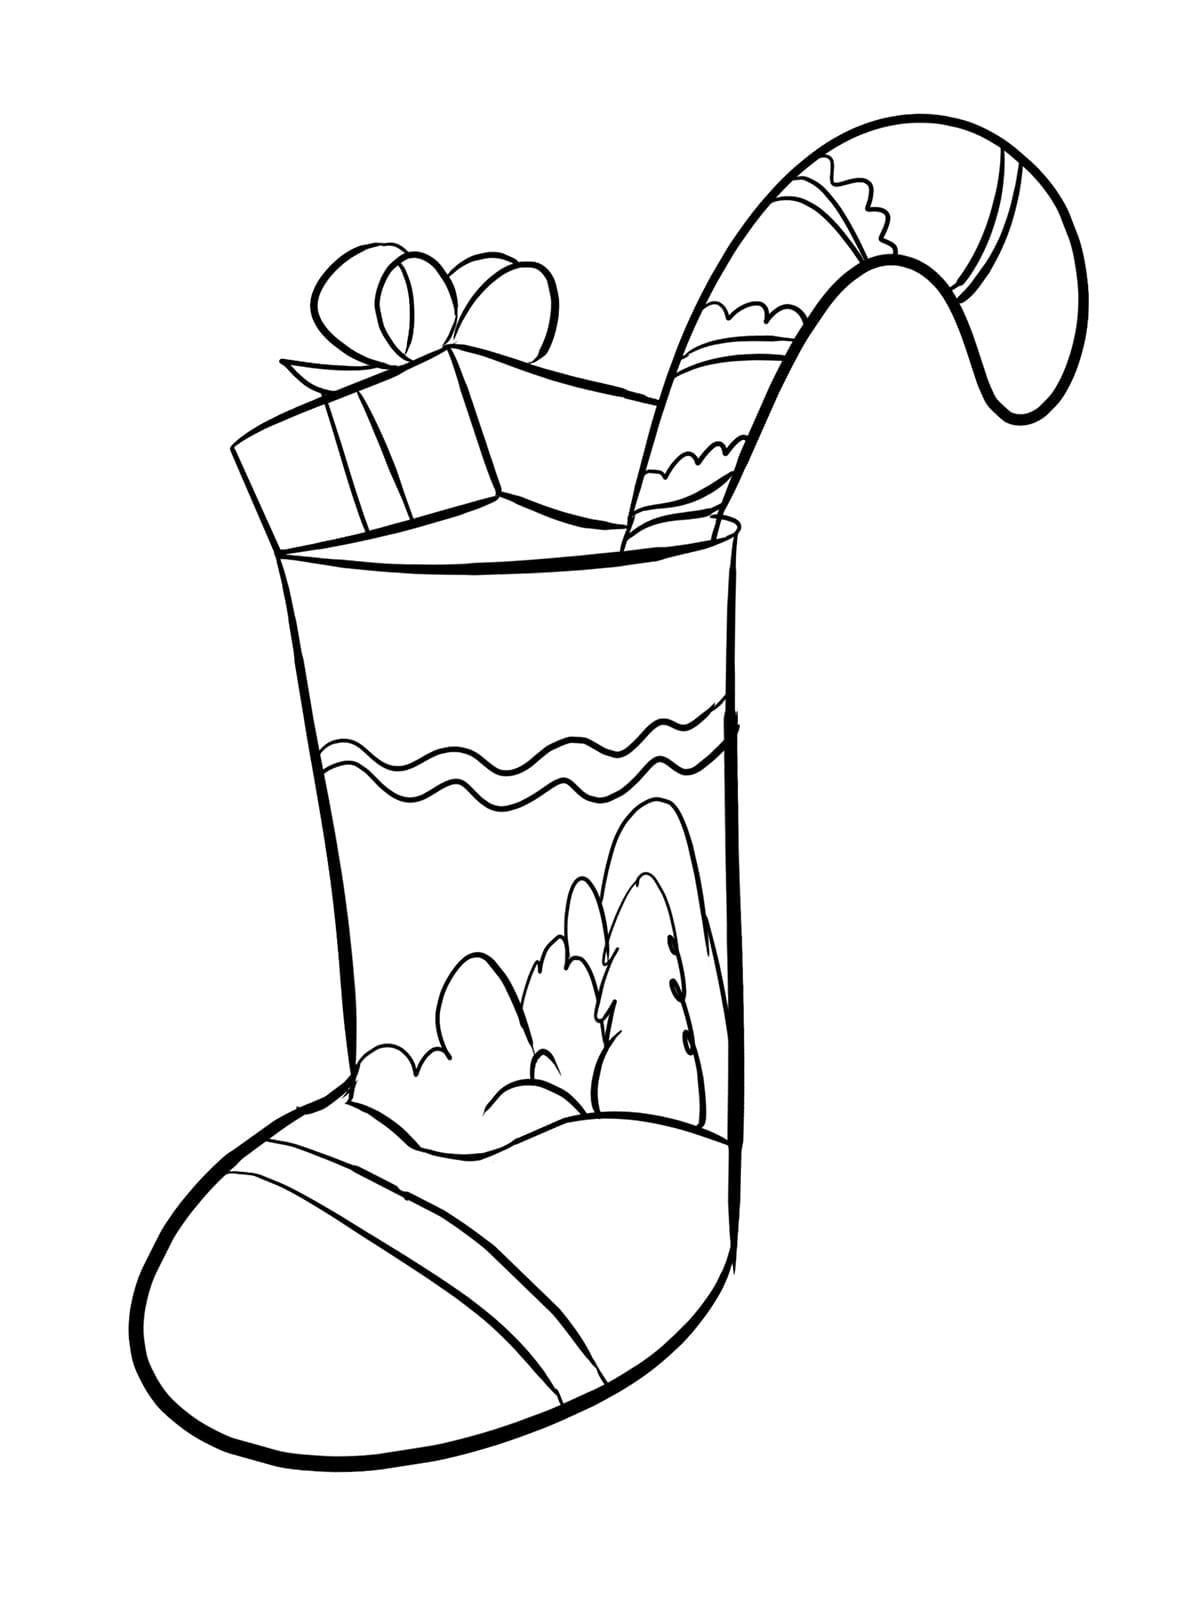 Festive Gift Accessory Coloring Page